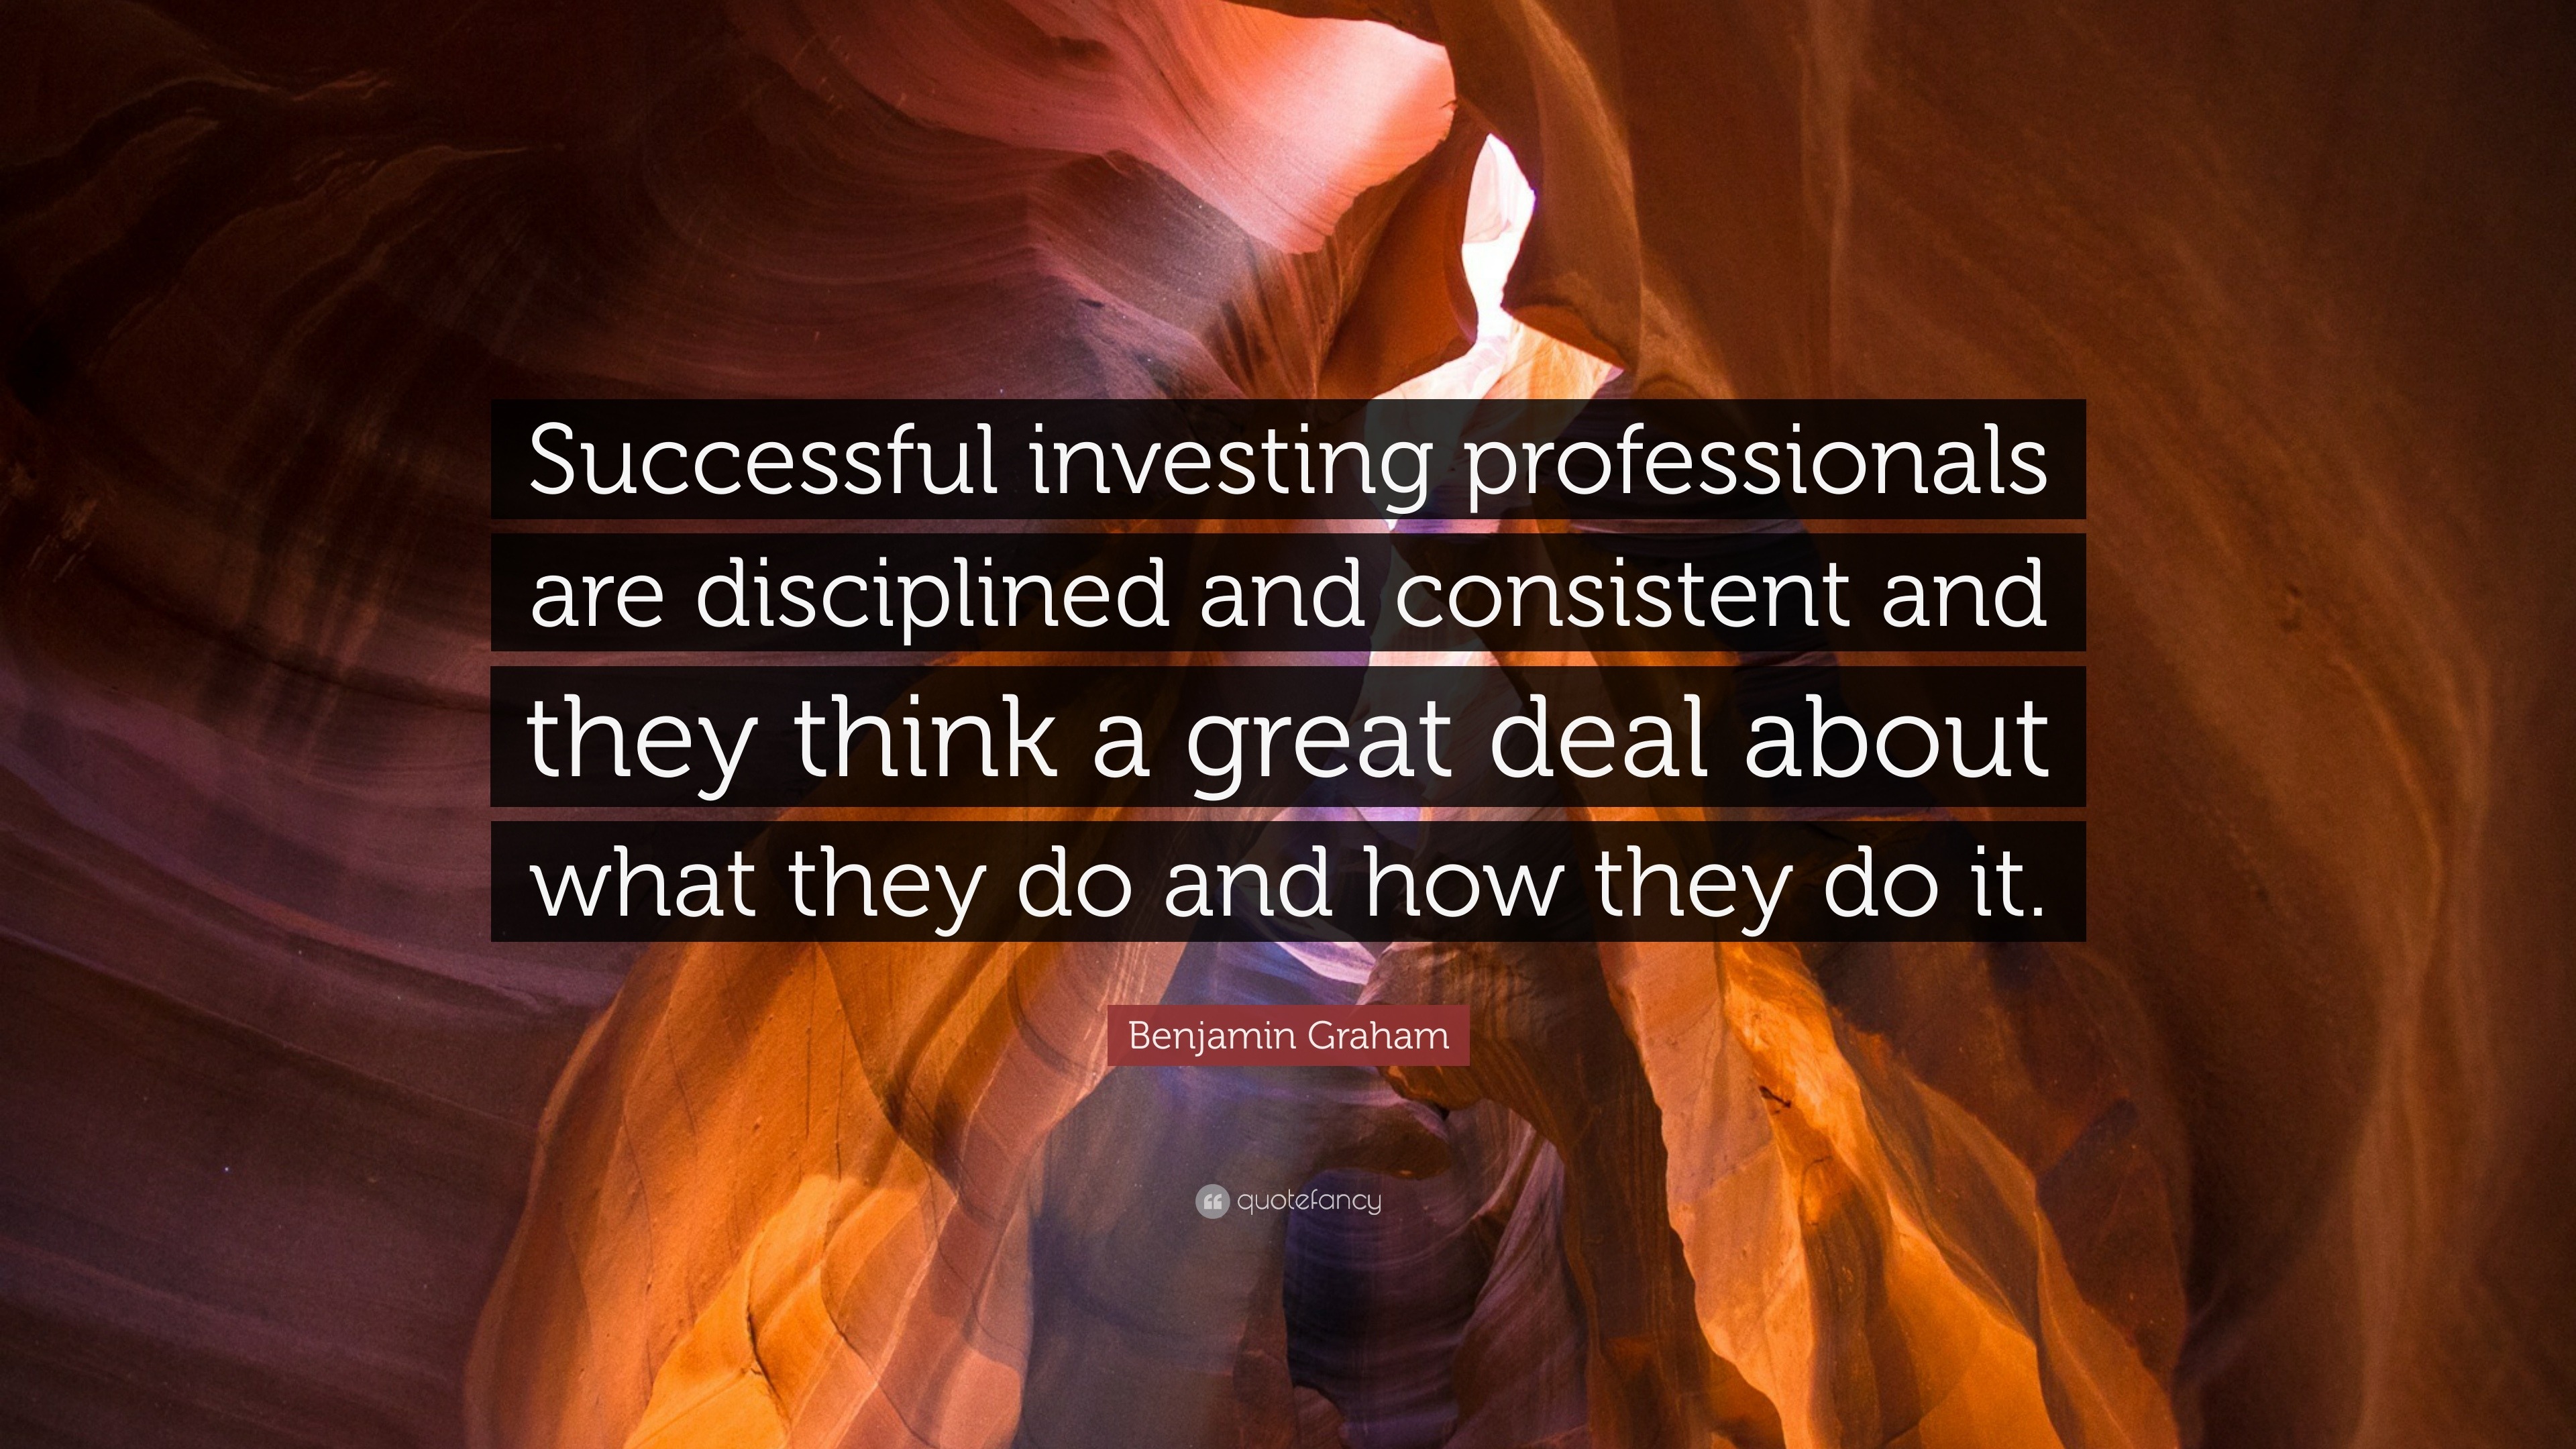 Benjamin Graham Quote: “Successful investing professionals are disciplined  and consistent and they think a great deal about what they do and how”